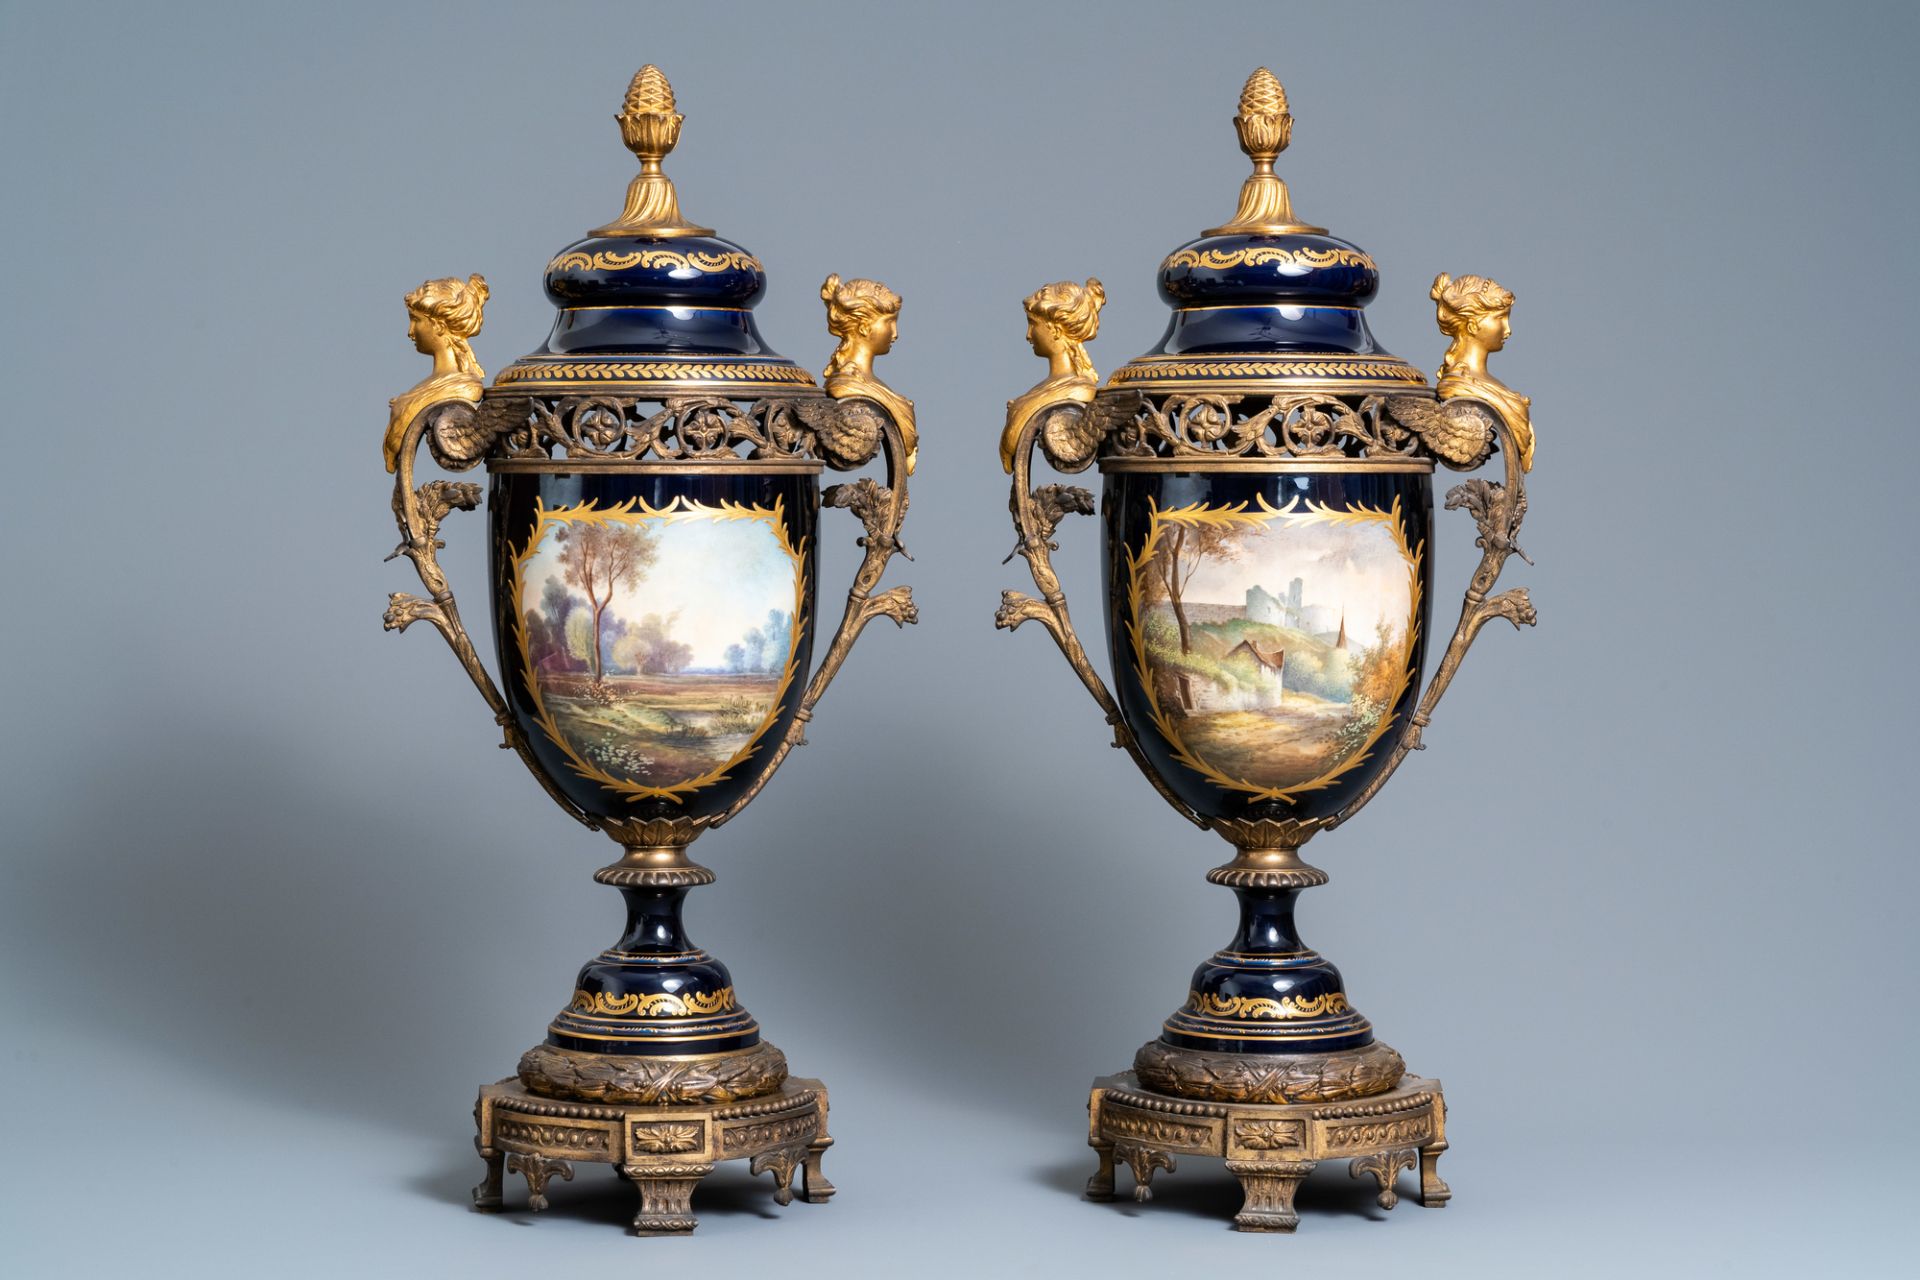 A pair of large French Svres-style vases with gilded bronze mounts, signed Le Berre, 19th C. - Image 3 of 8